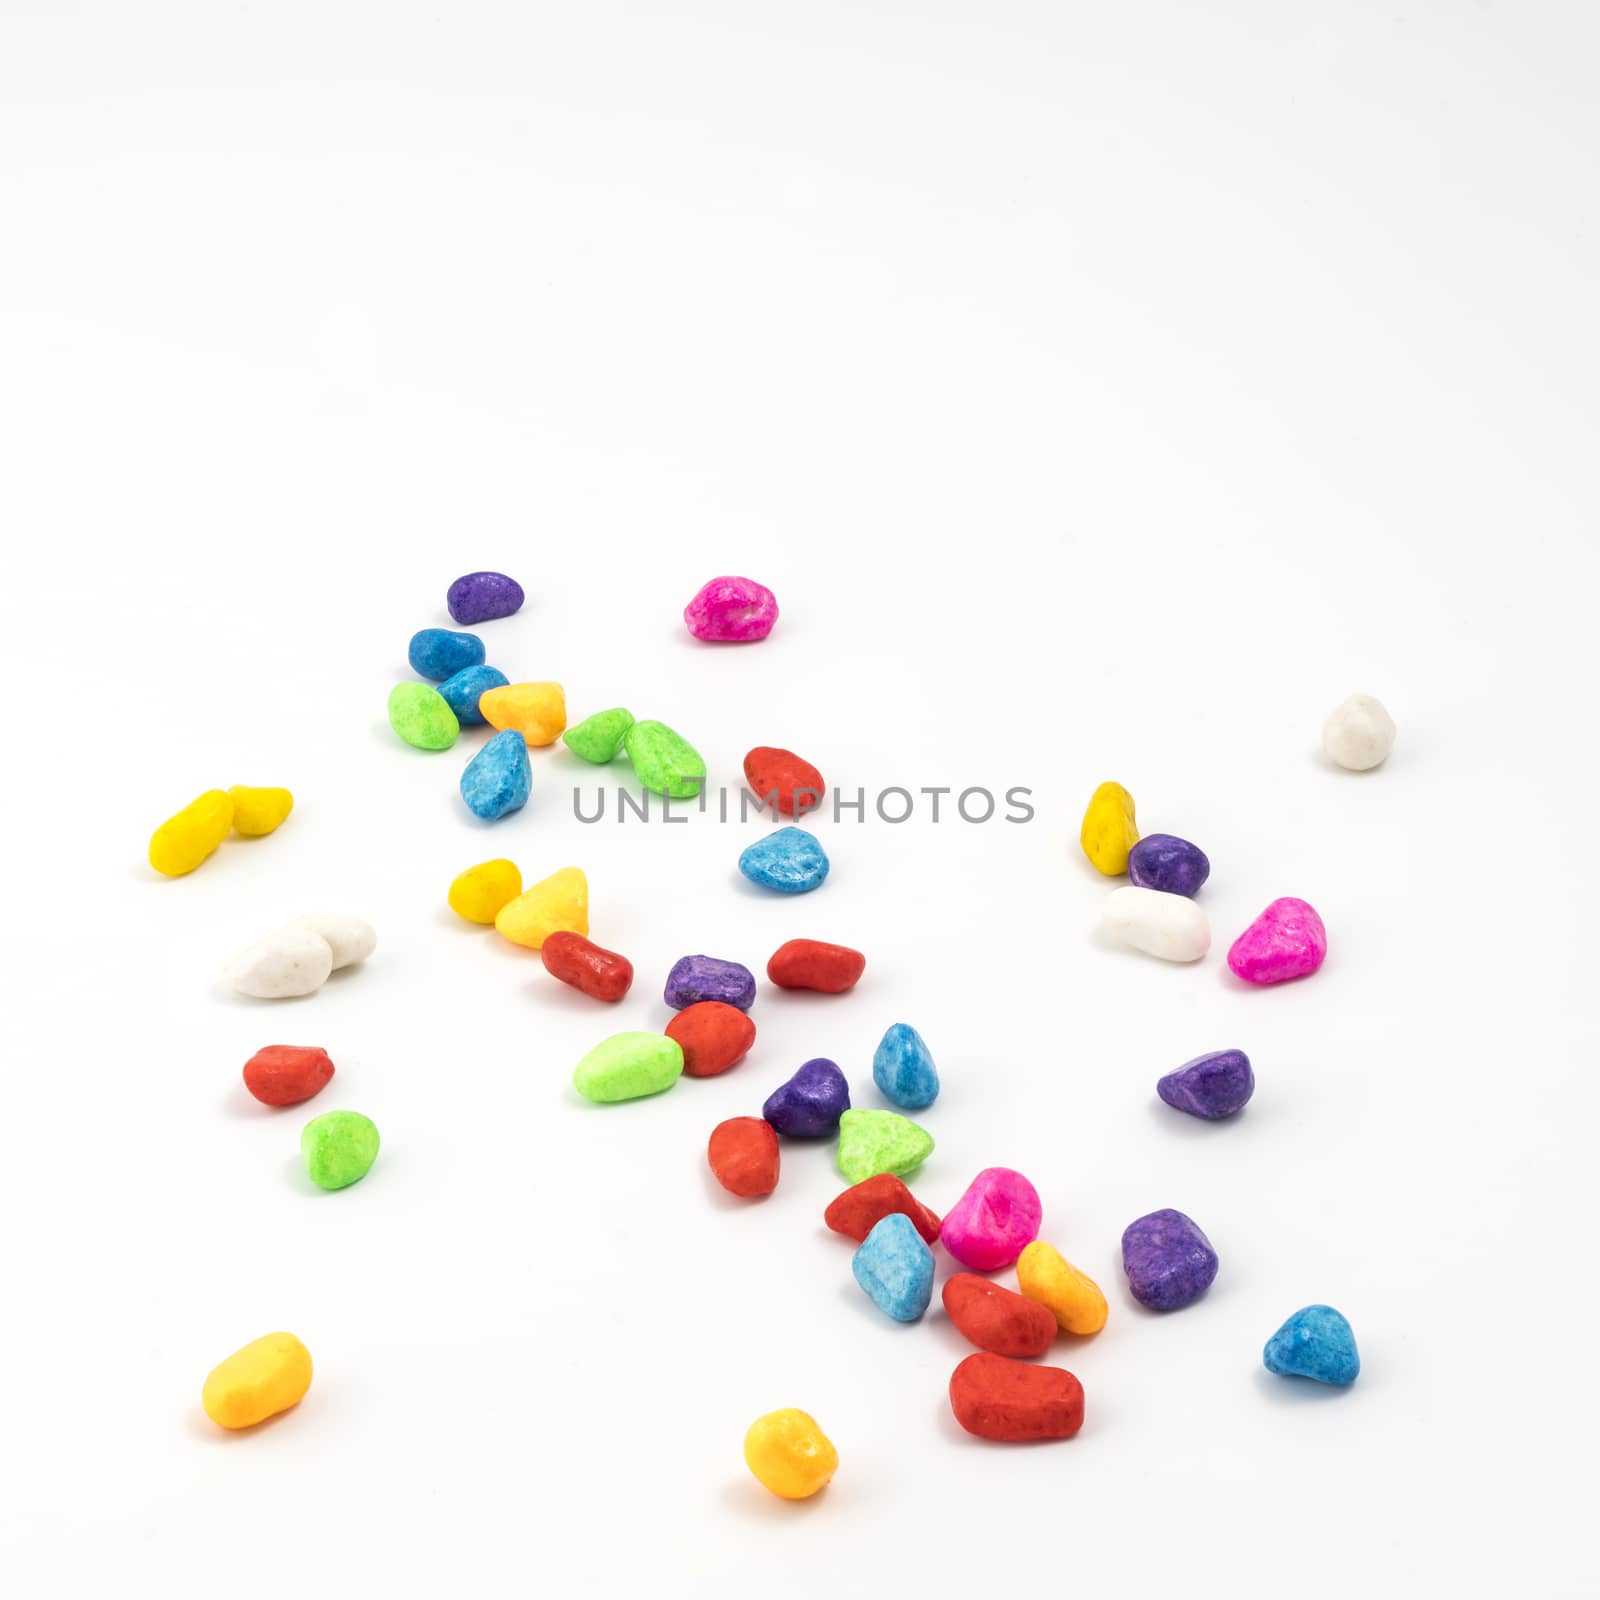 some colored pebbles by sergiodv